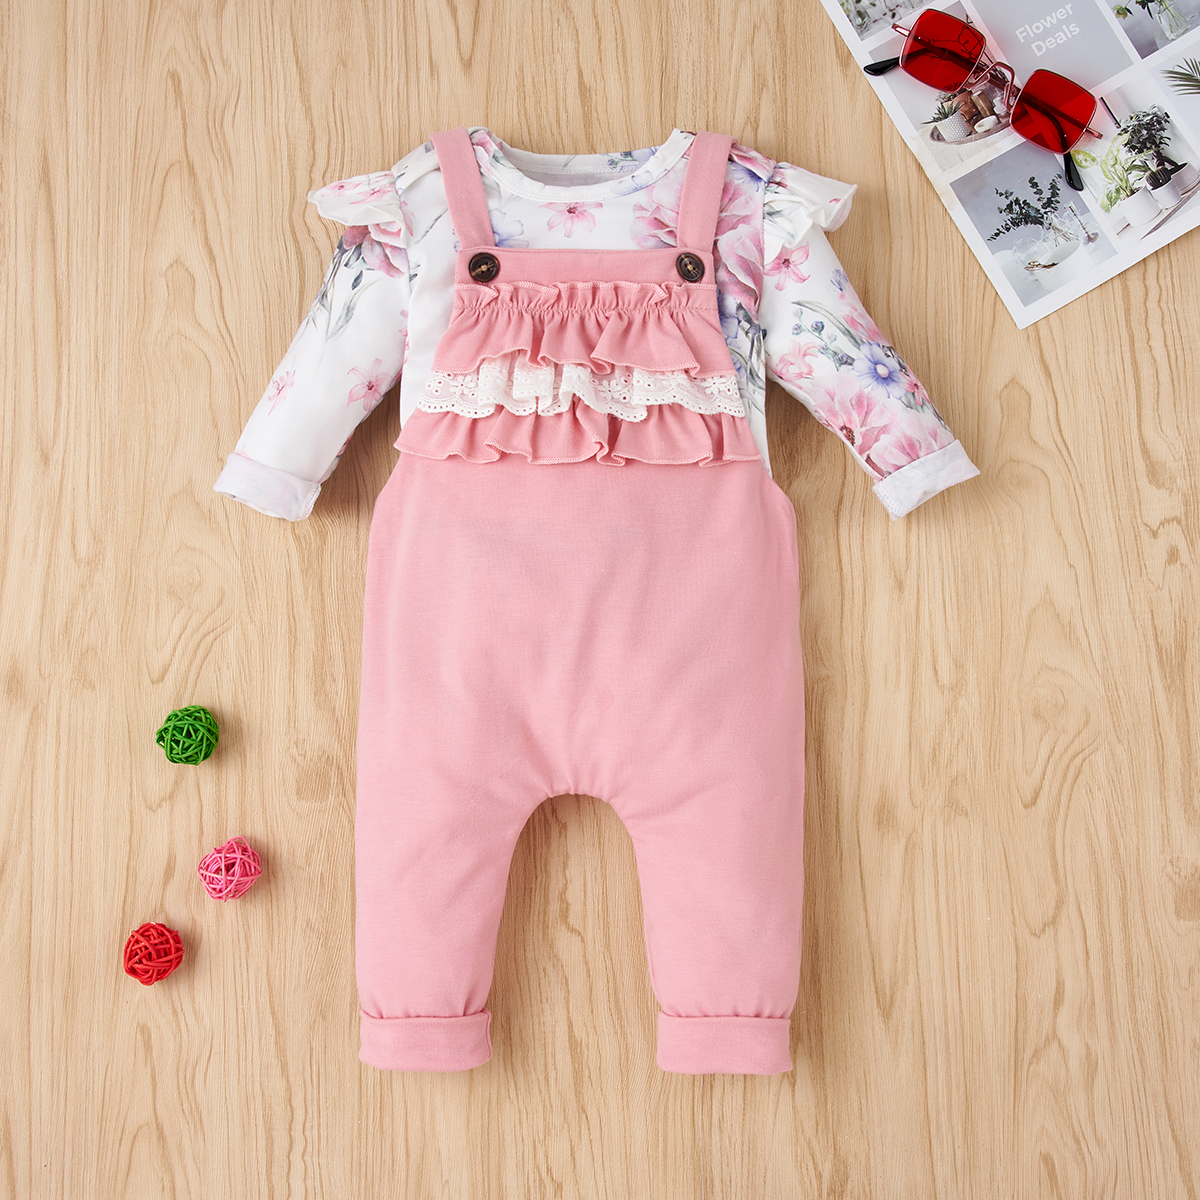 2pcs Baby Girl Sweet Floral Baby's Sets Long-sleeve outside wear sports suit clothing sets